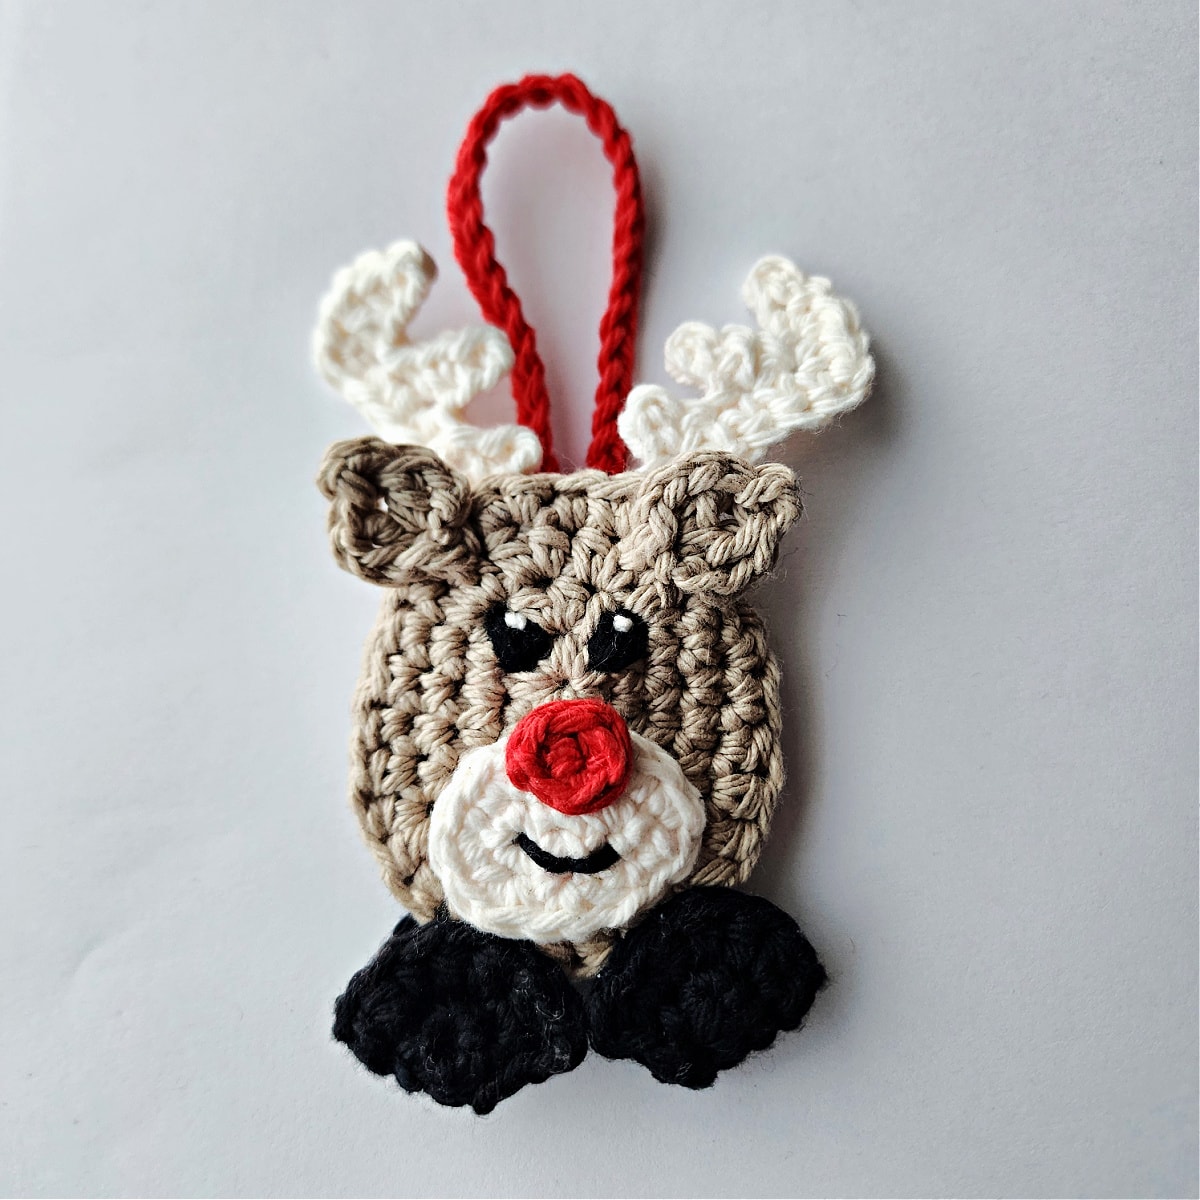 completed crochet reindeer candy cane holder ornament with hanging loop